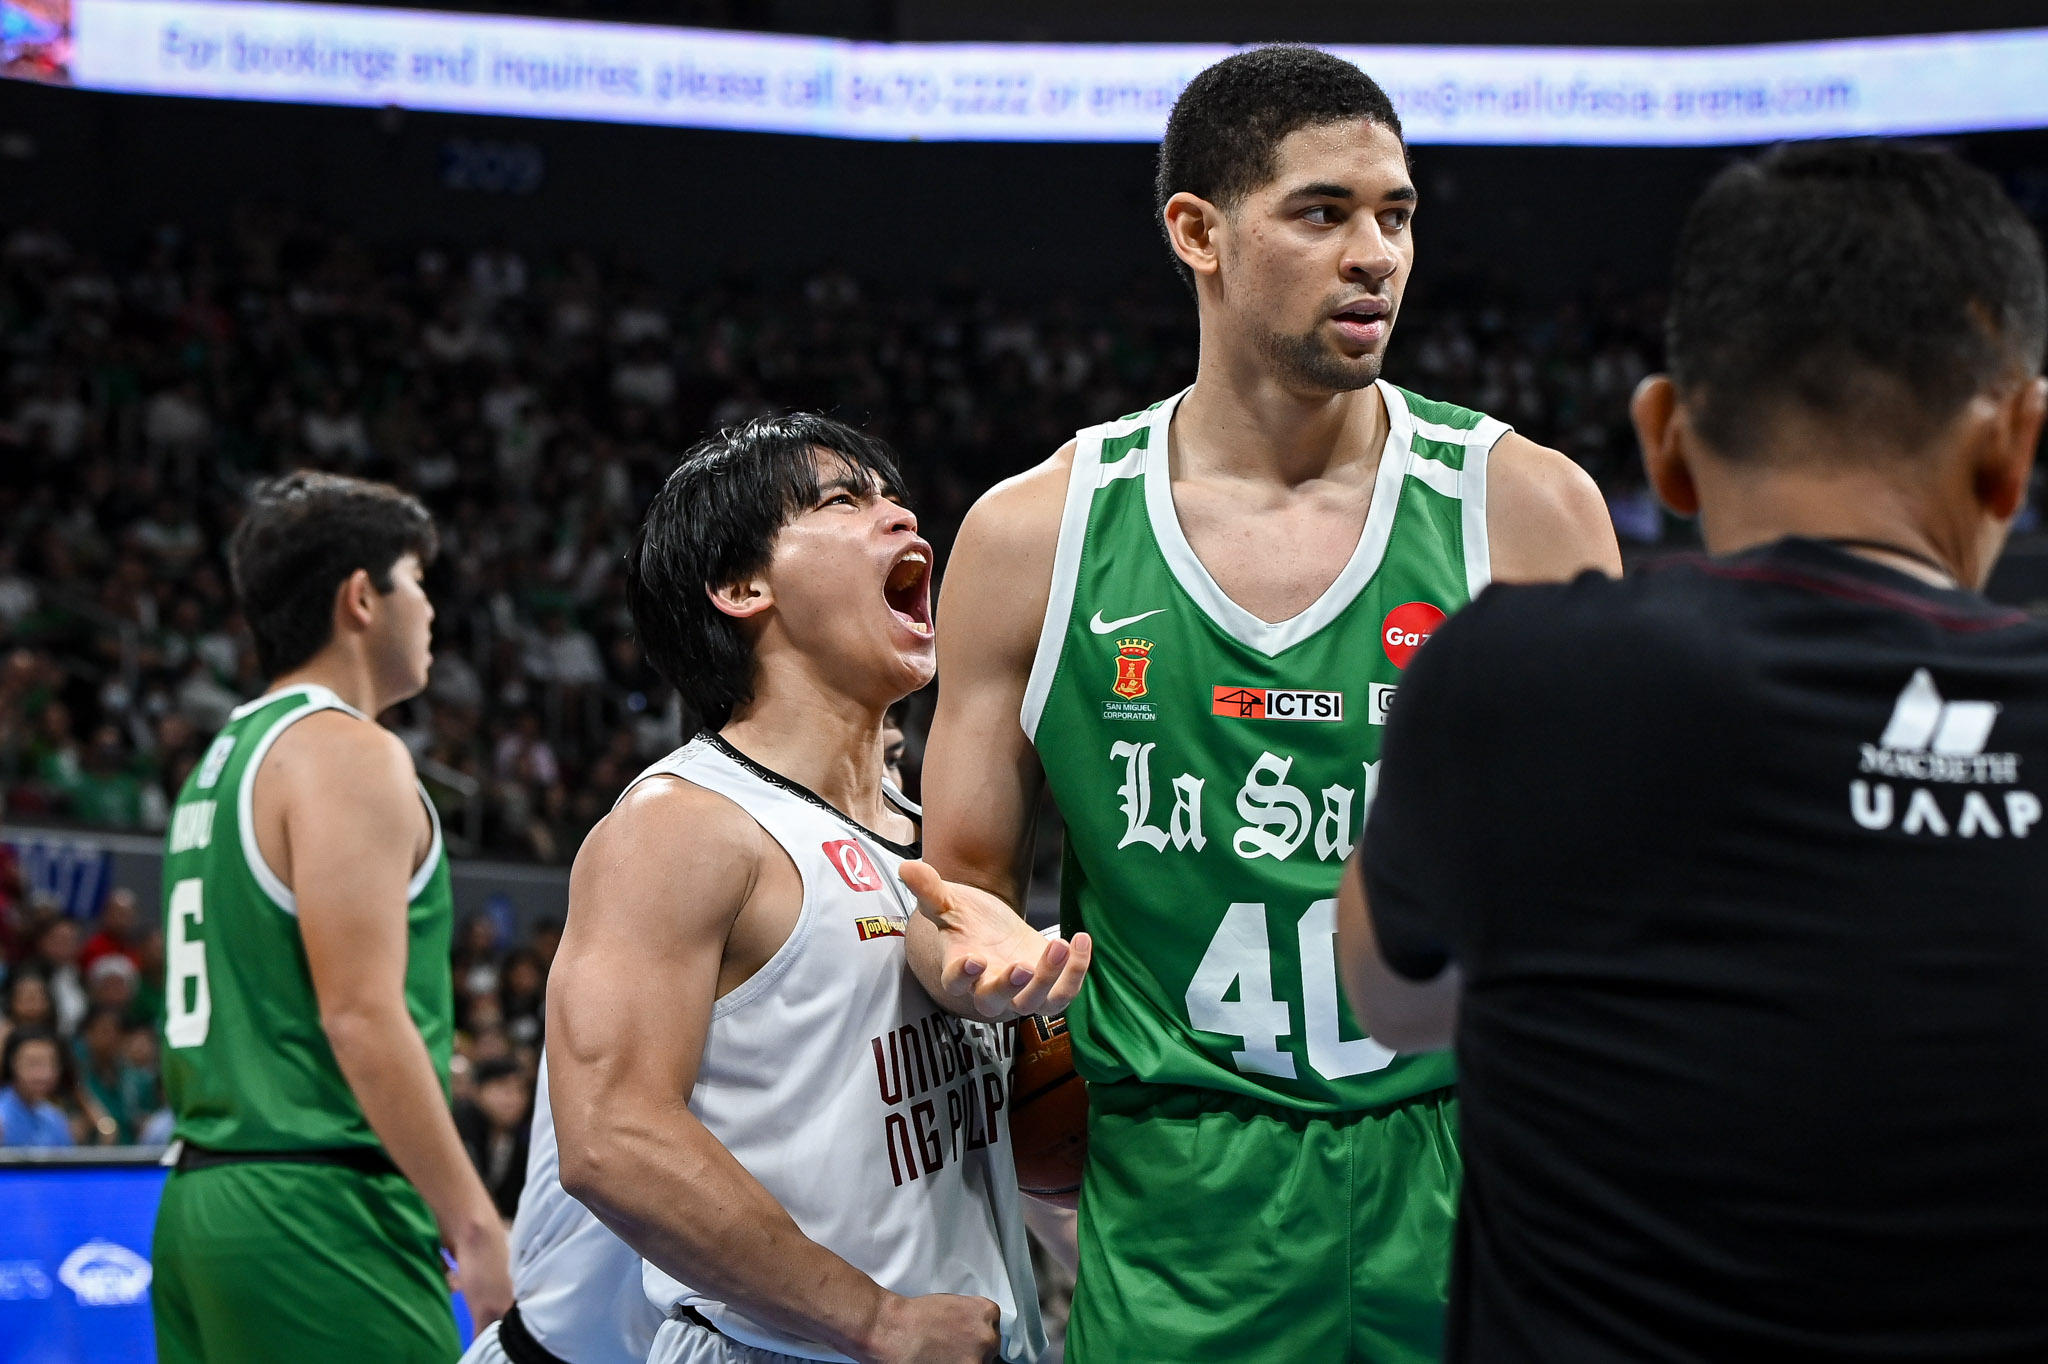 UAAP86-MBB-UP-vs-DLSU-JD-CAGULANGAN-MIKE-PHILLIPS-7460 UP smothers La Salle in most one-sided UAAP MBB Finals game in 25 years Basketball DLSU News UAAP UP  - philippine sports news